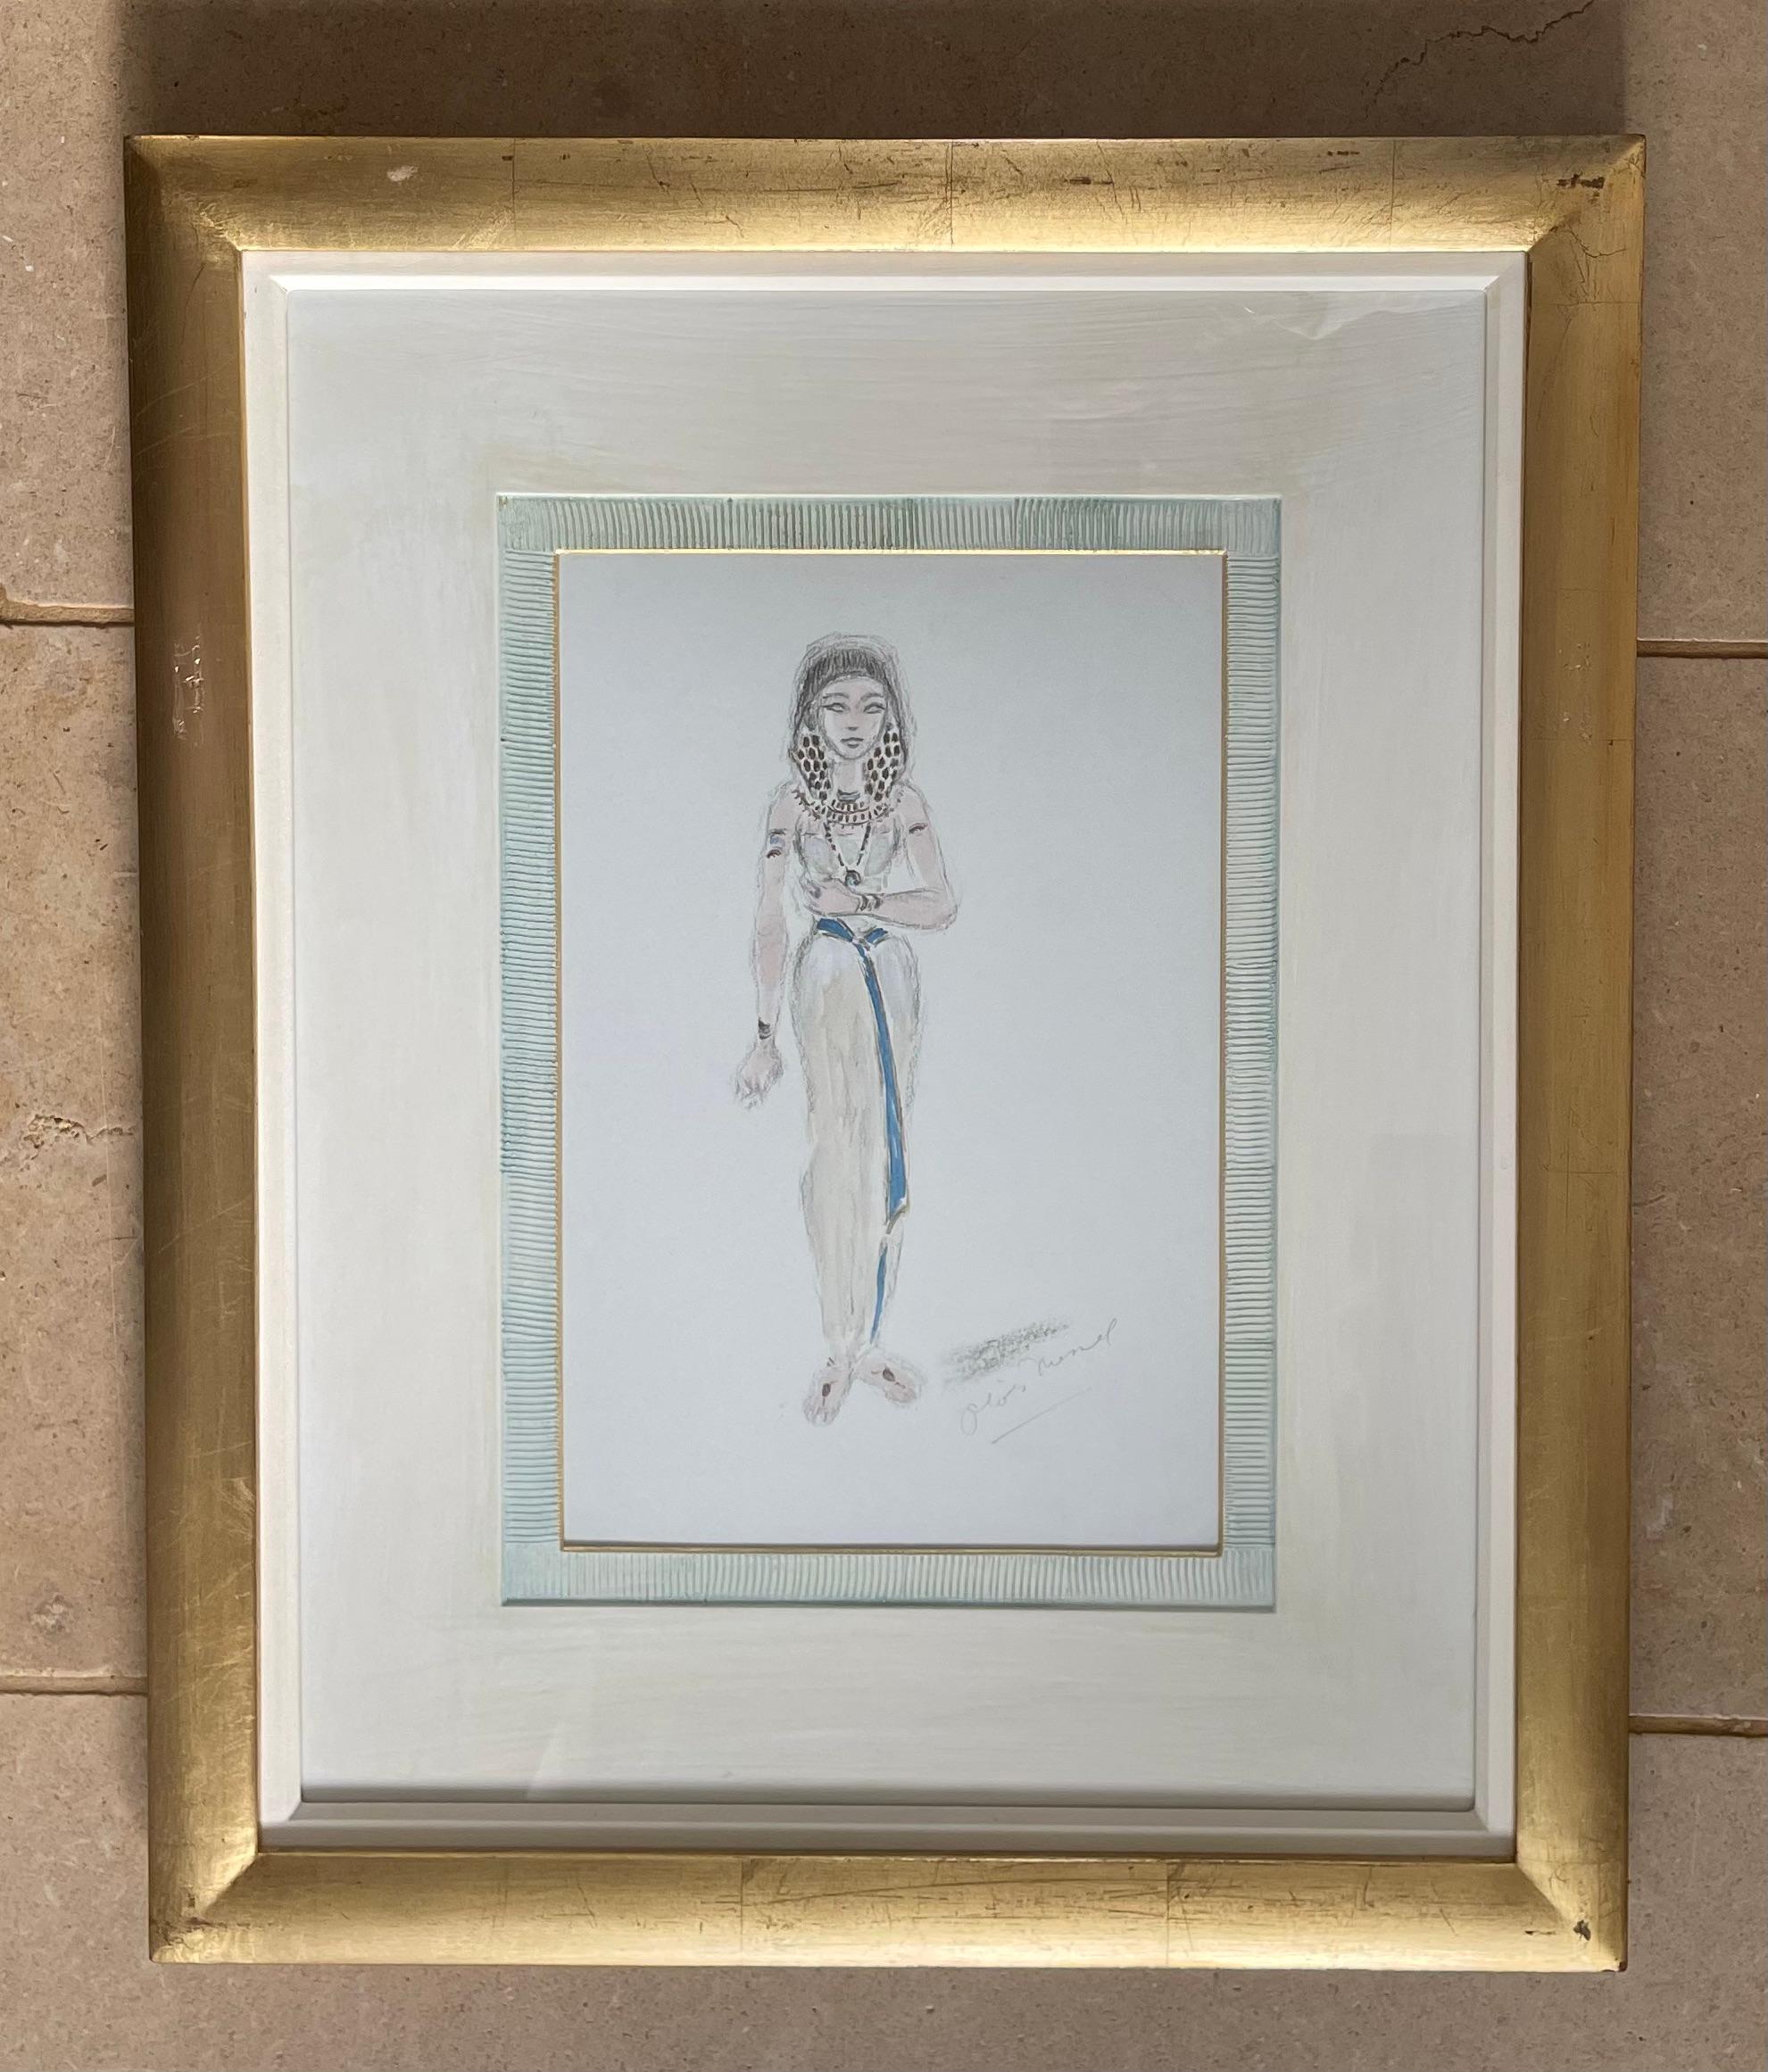 OLIVER MESSEL
(1904-1978)

Blue Costume Design for Vivian Leigh in Caesar and Cleopatra - 1945

Signed l.r.: Oliver Messel 
Watercolour and chalks heightened with white and gold paint
Framed

14 ¼ by 9 ½ in., 36 by 24 cm.
(Frame size 26 by 21 ¼ in.,